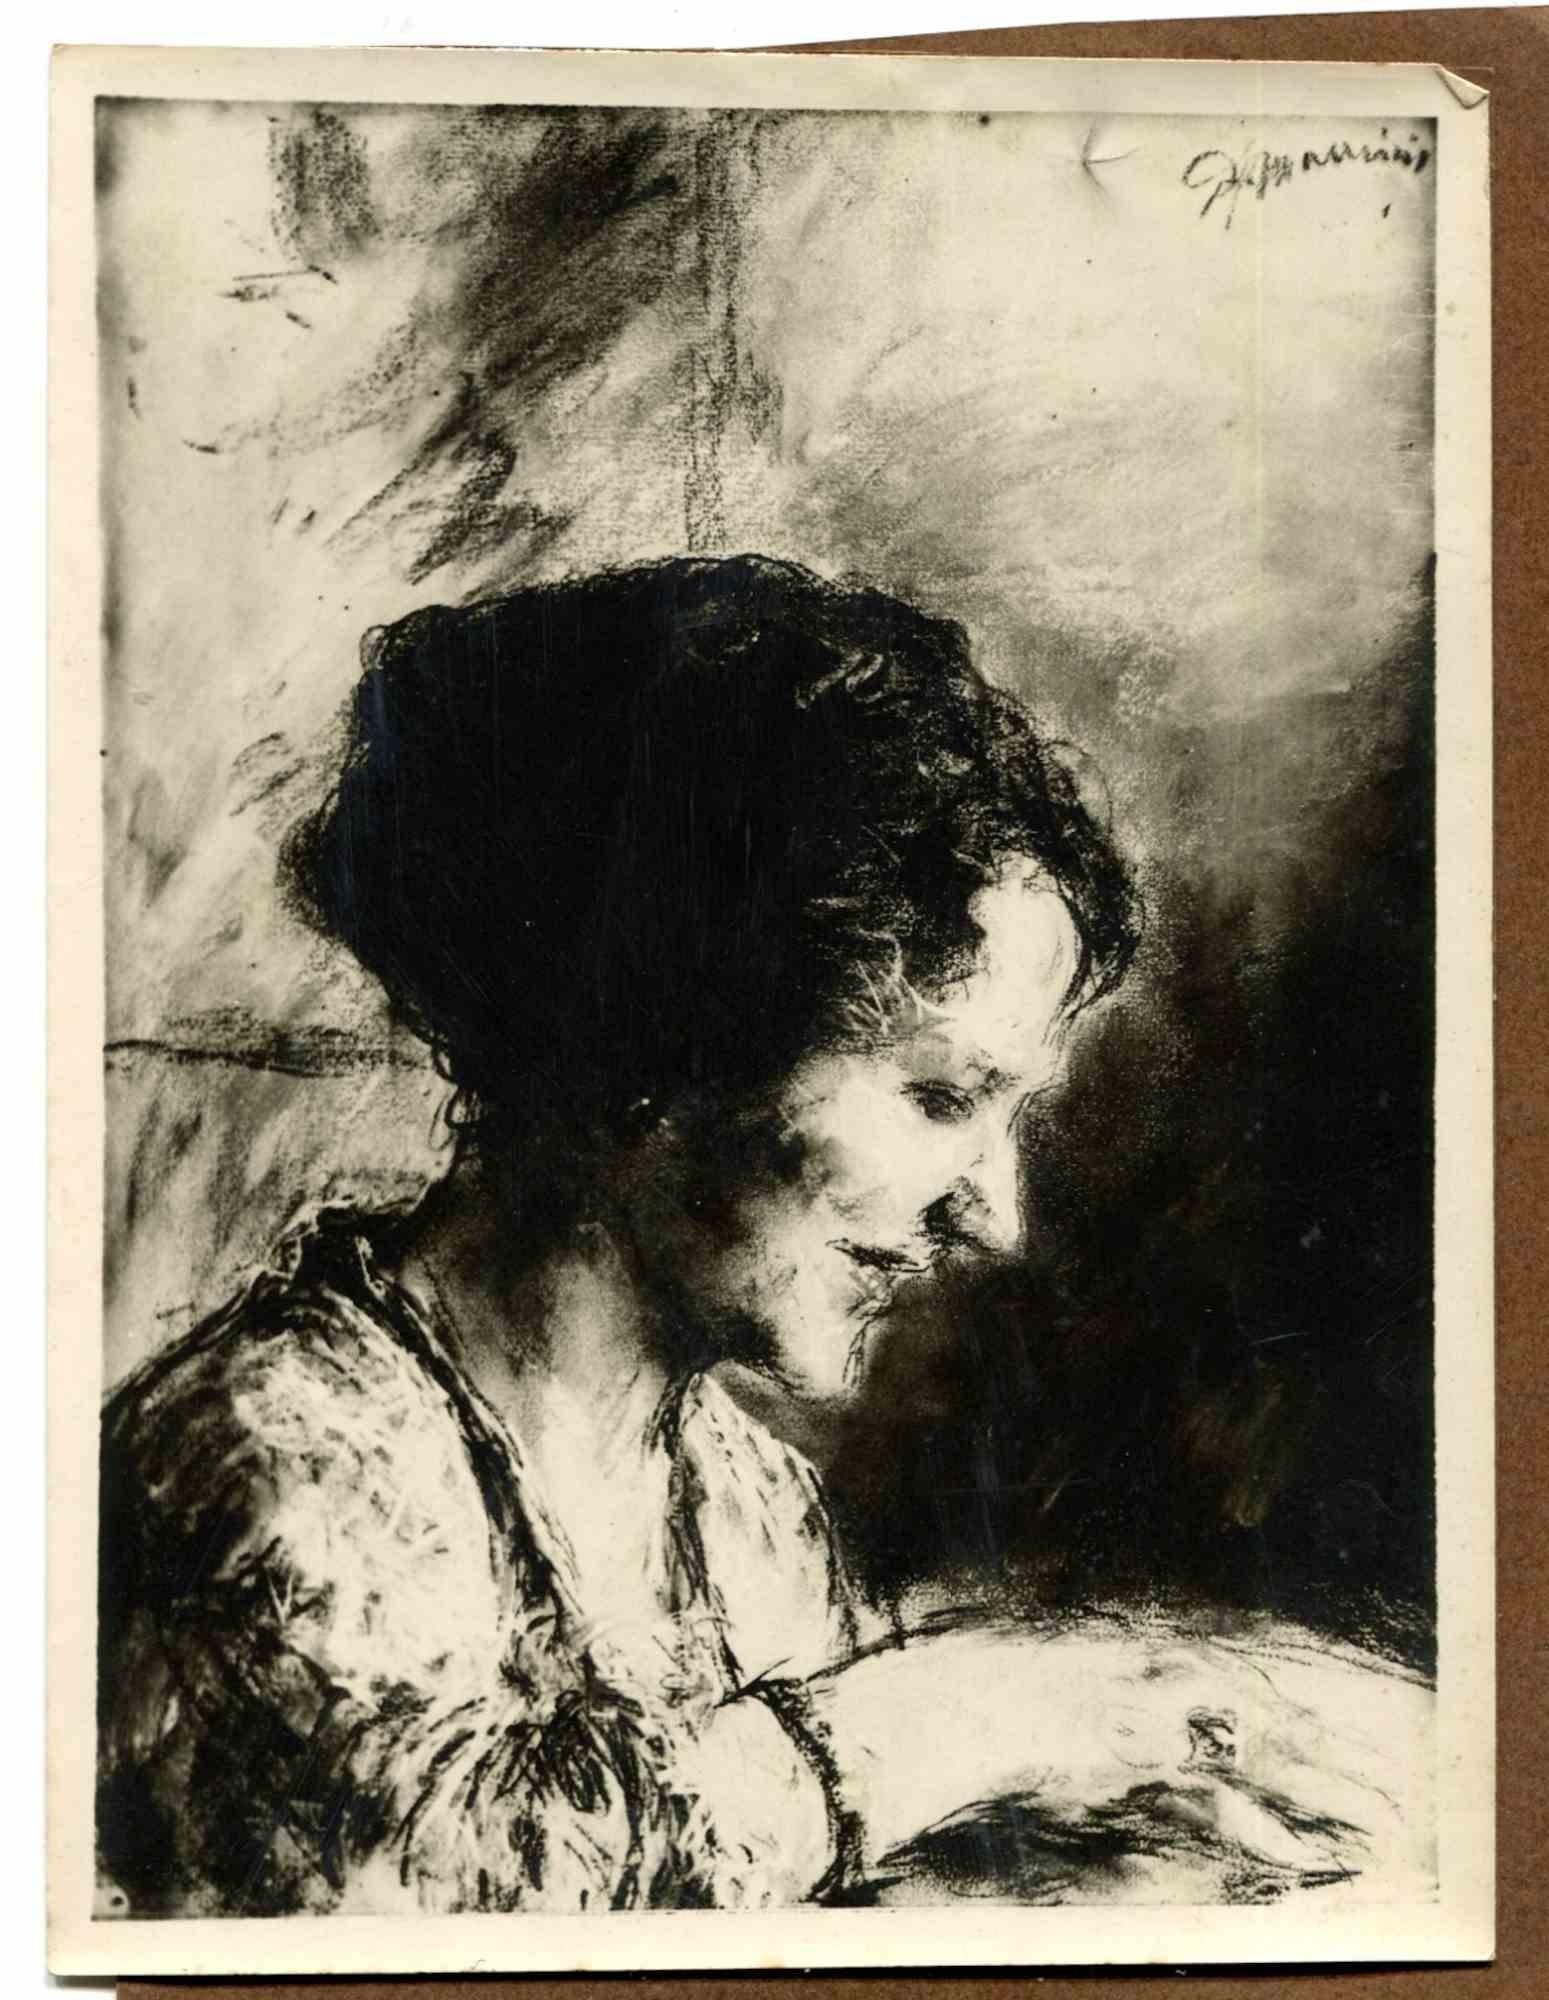 Unknown Figurative Photograph - Vintage Photo of Painting - Vintage Photo - Early 20th Century